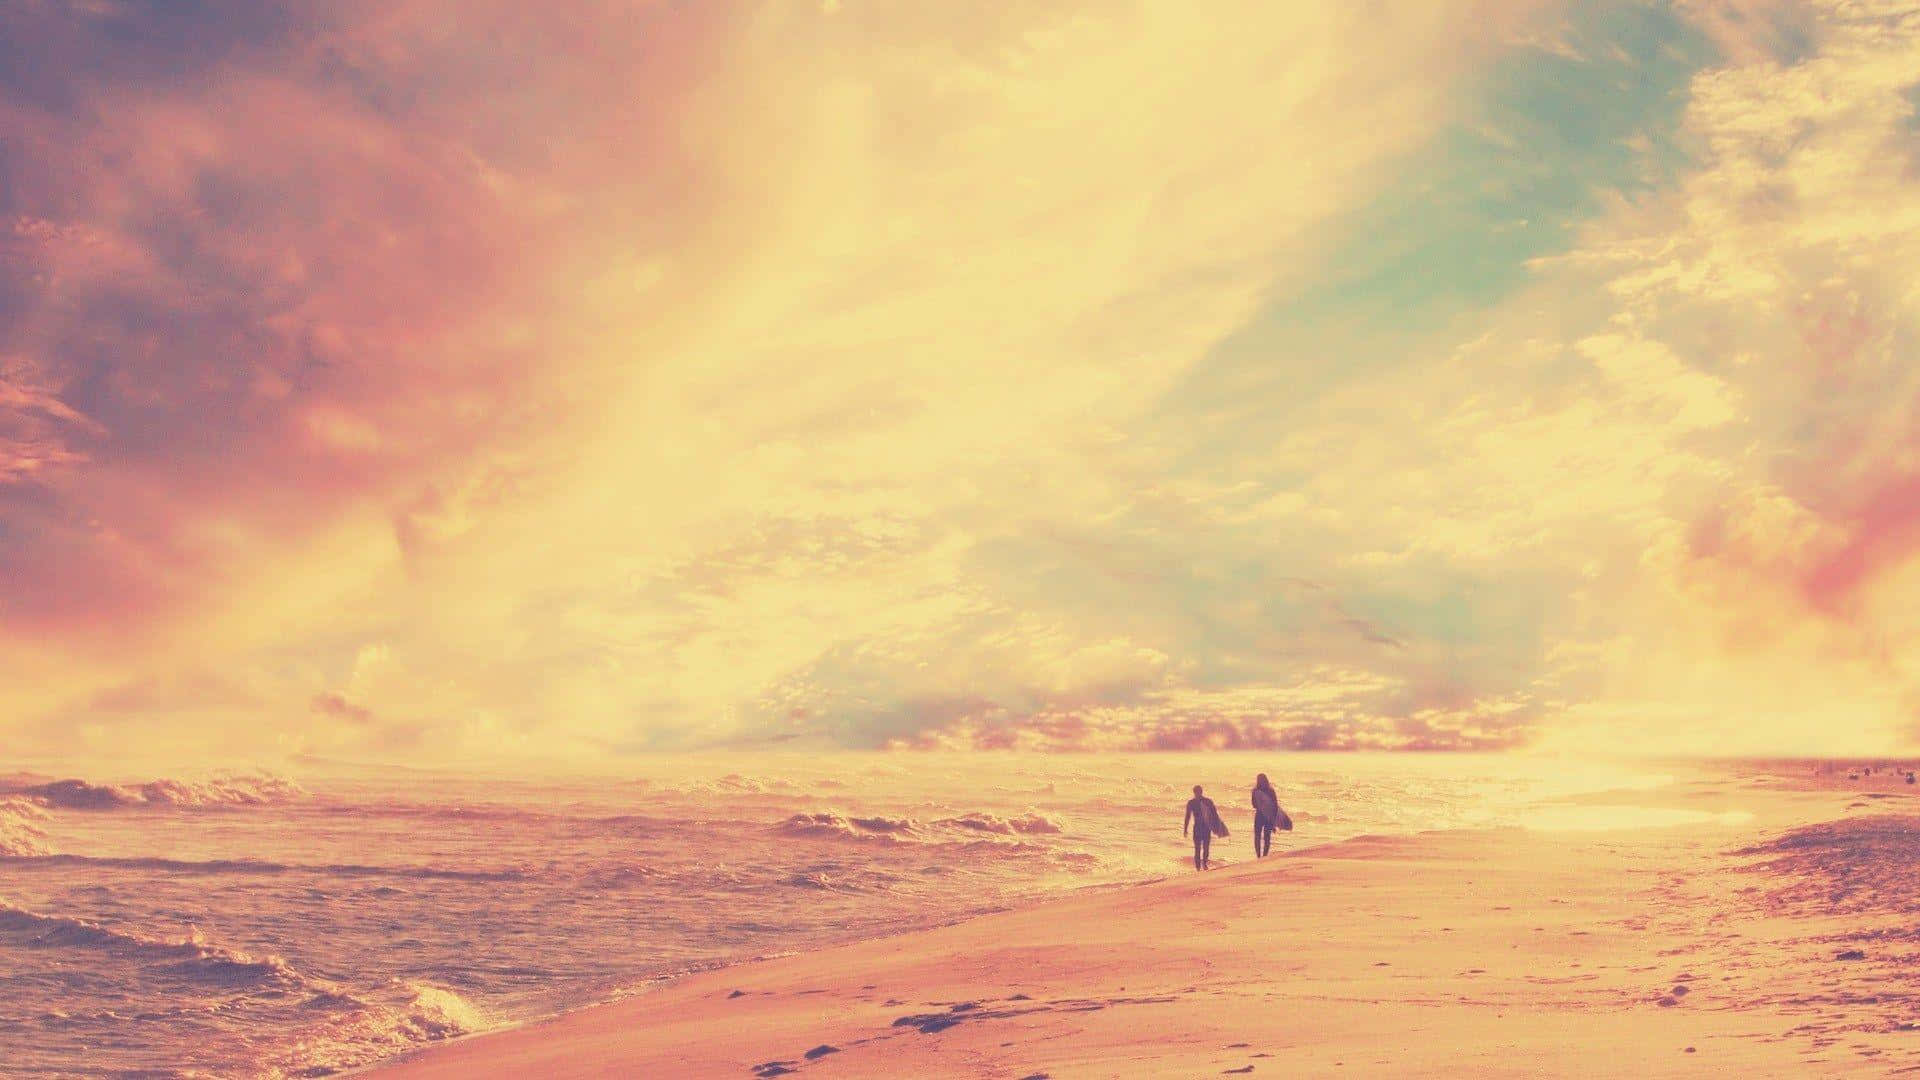 Take a peaceful stroll at the tranquility of the retro beach. Wallpaper